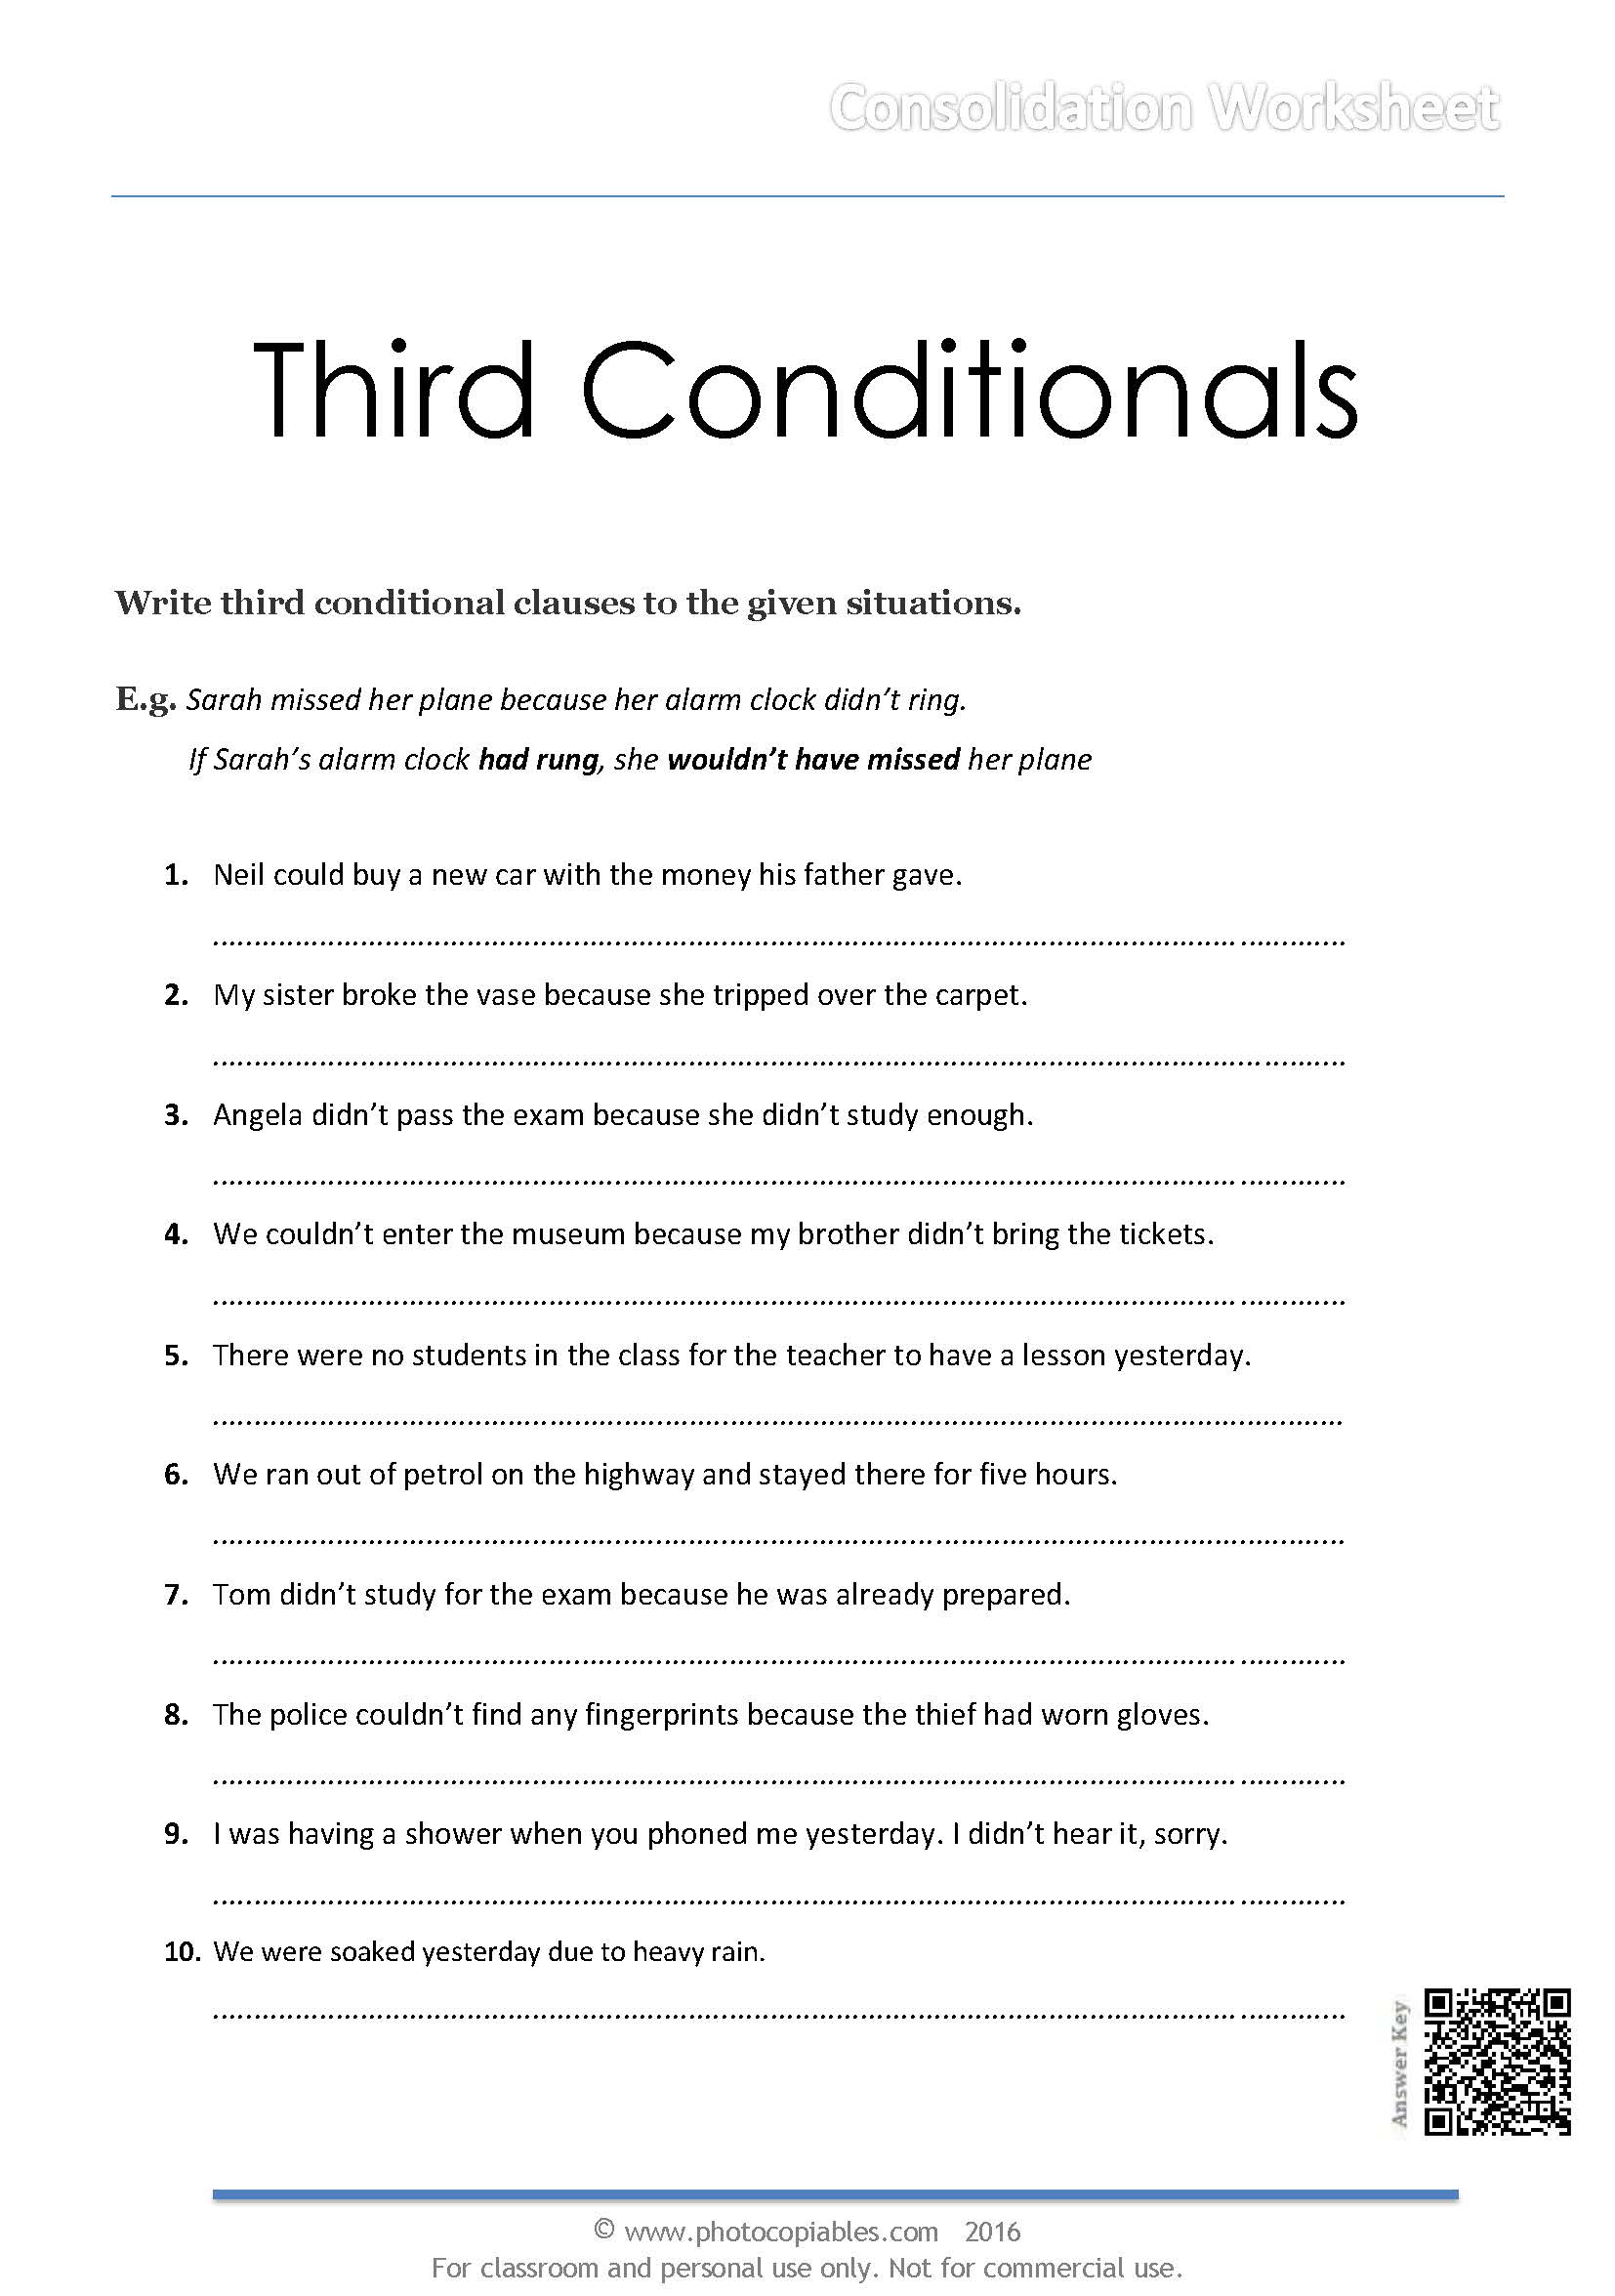 third-conditionals-worksheet-photocopiables